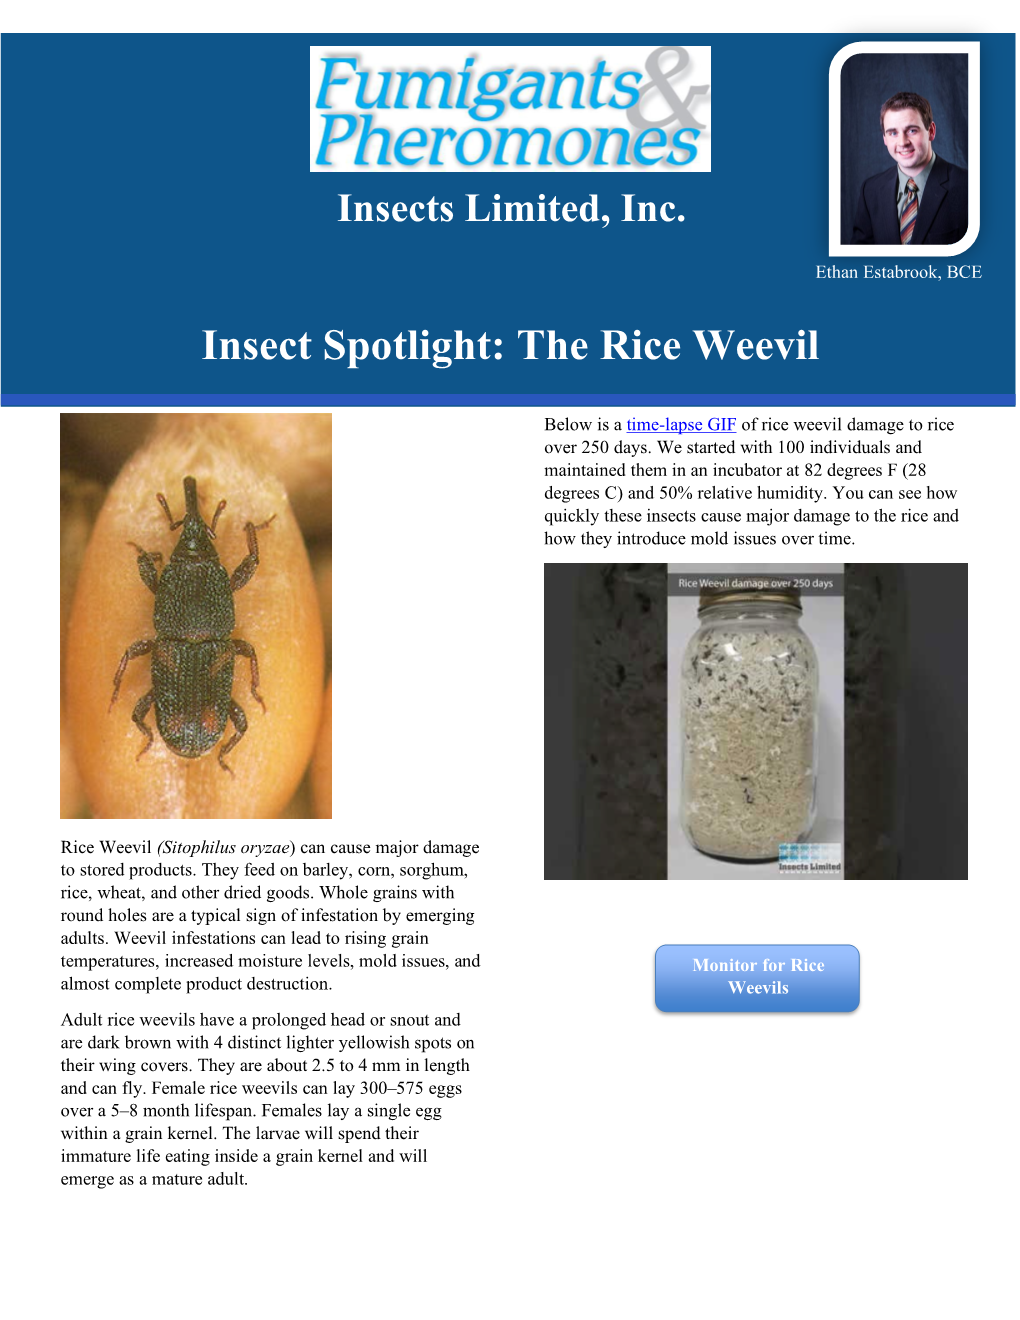 Insect Spotlight: the Rice Weevil